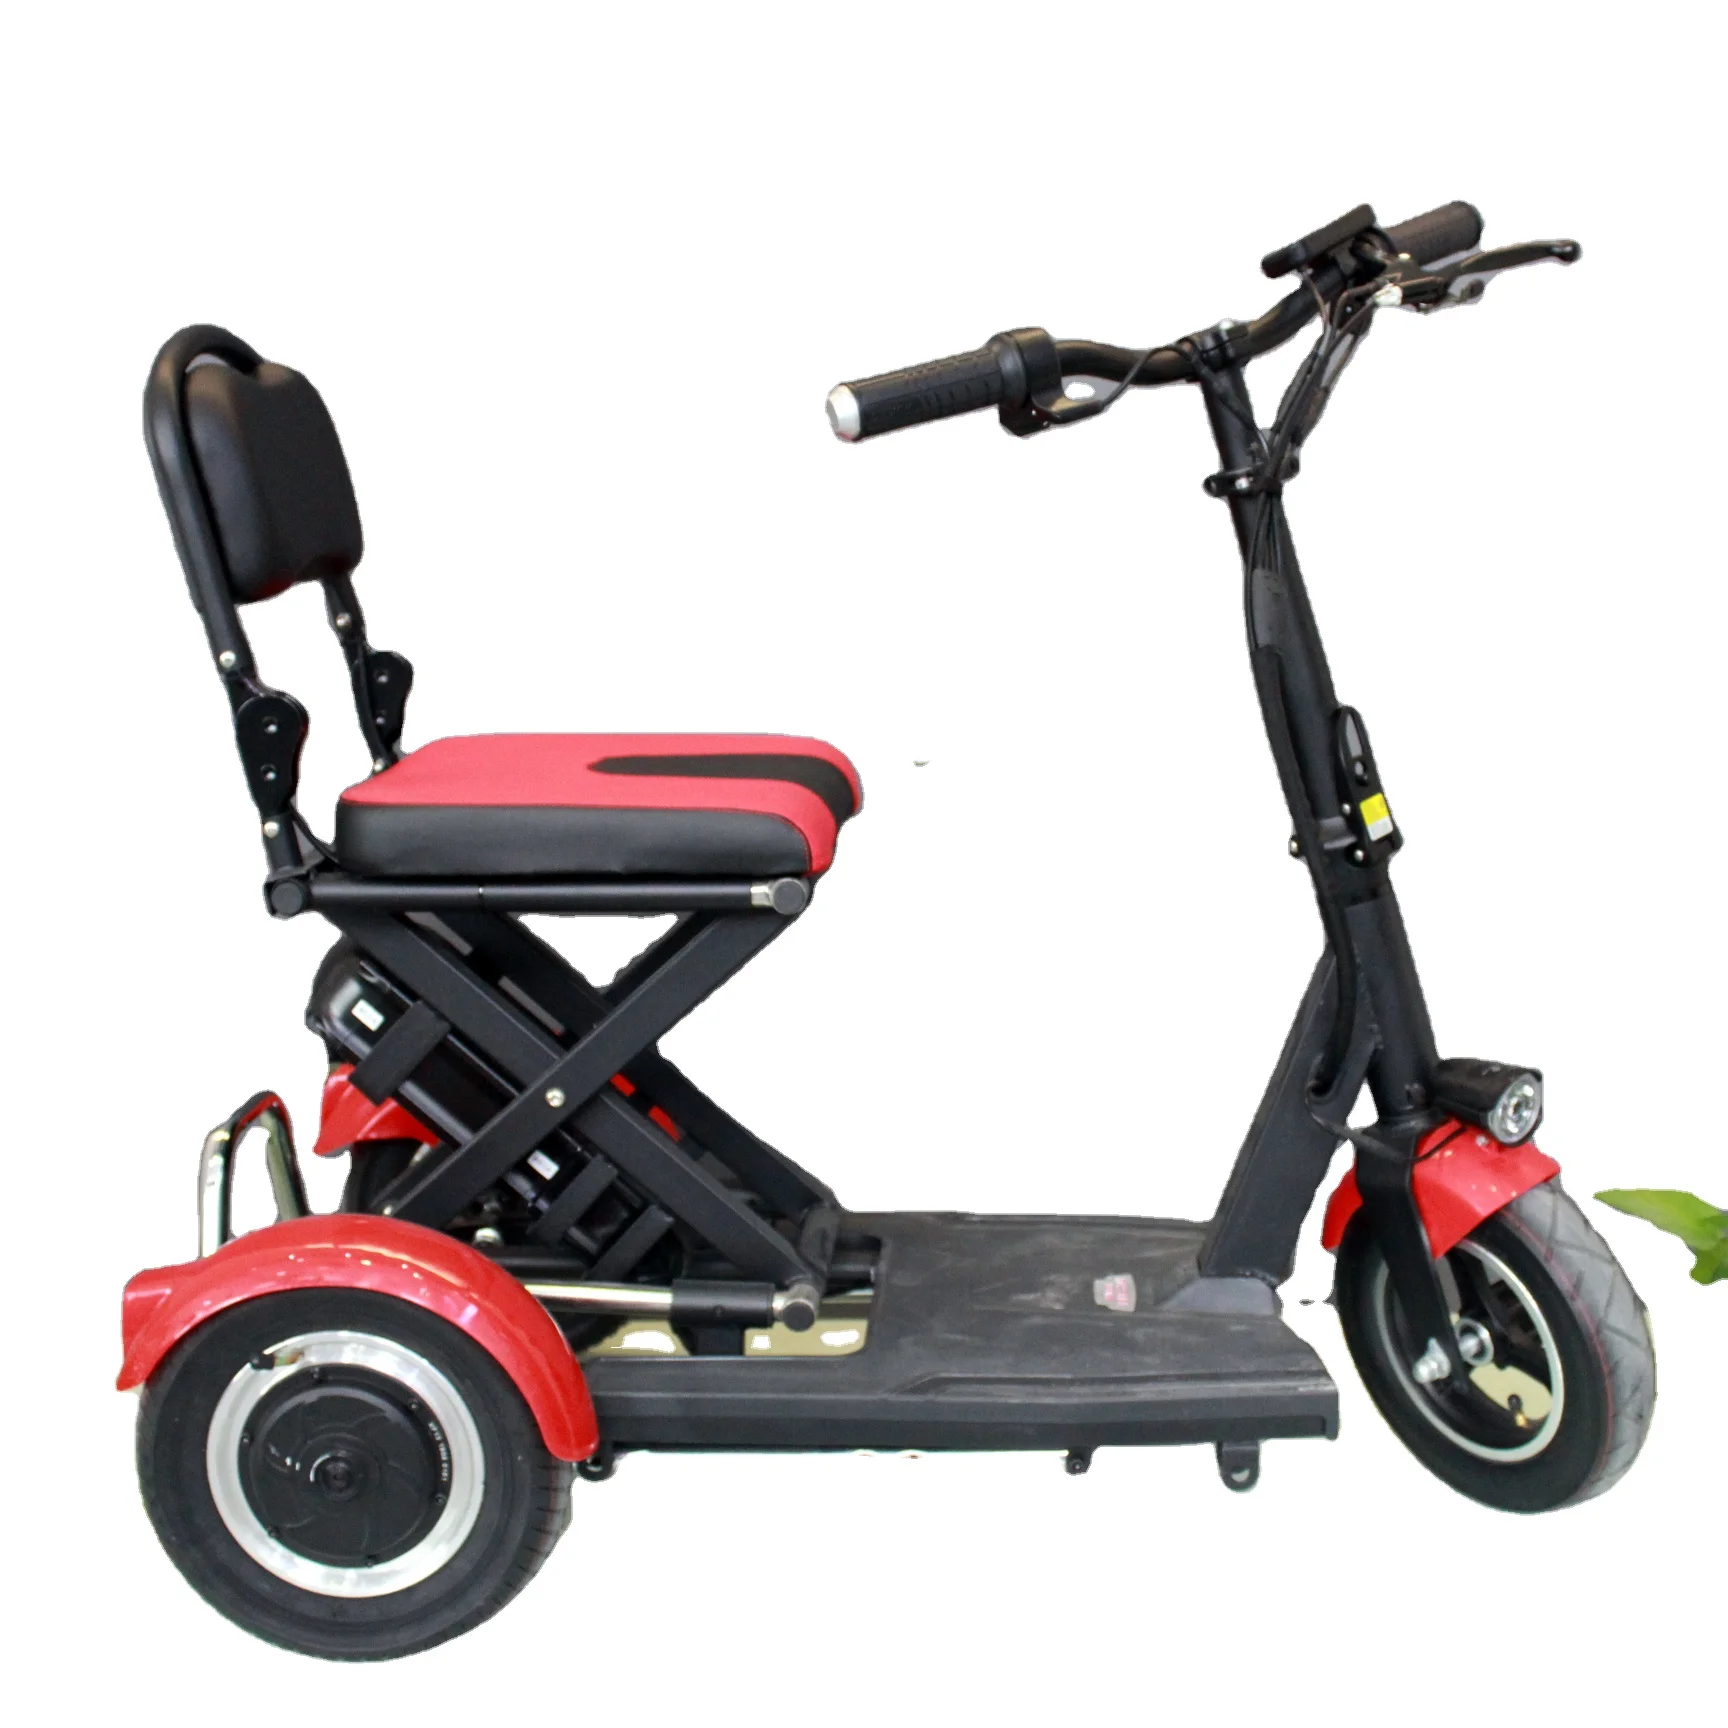 Electric Scooter Folding Type For Elderly And Disabled Handicapped Scooters 36v/48v 10Ah Lithium Battery Motor Scooter custom engwe t14 folding electric bicycle 14 inch tire 350w brushless motor 48v 10ah battery 25km h max speed grey